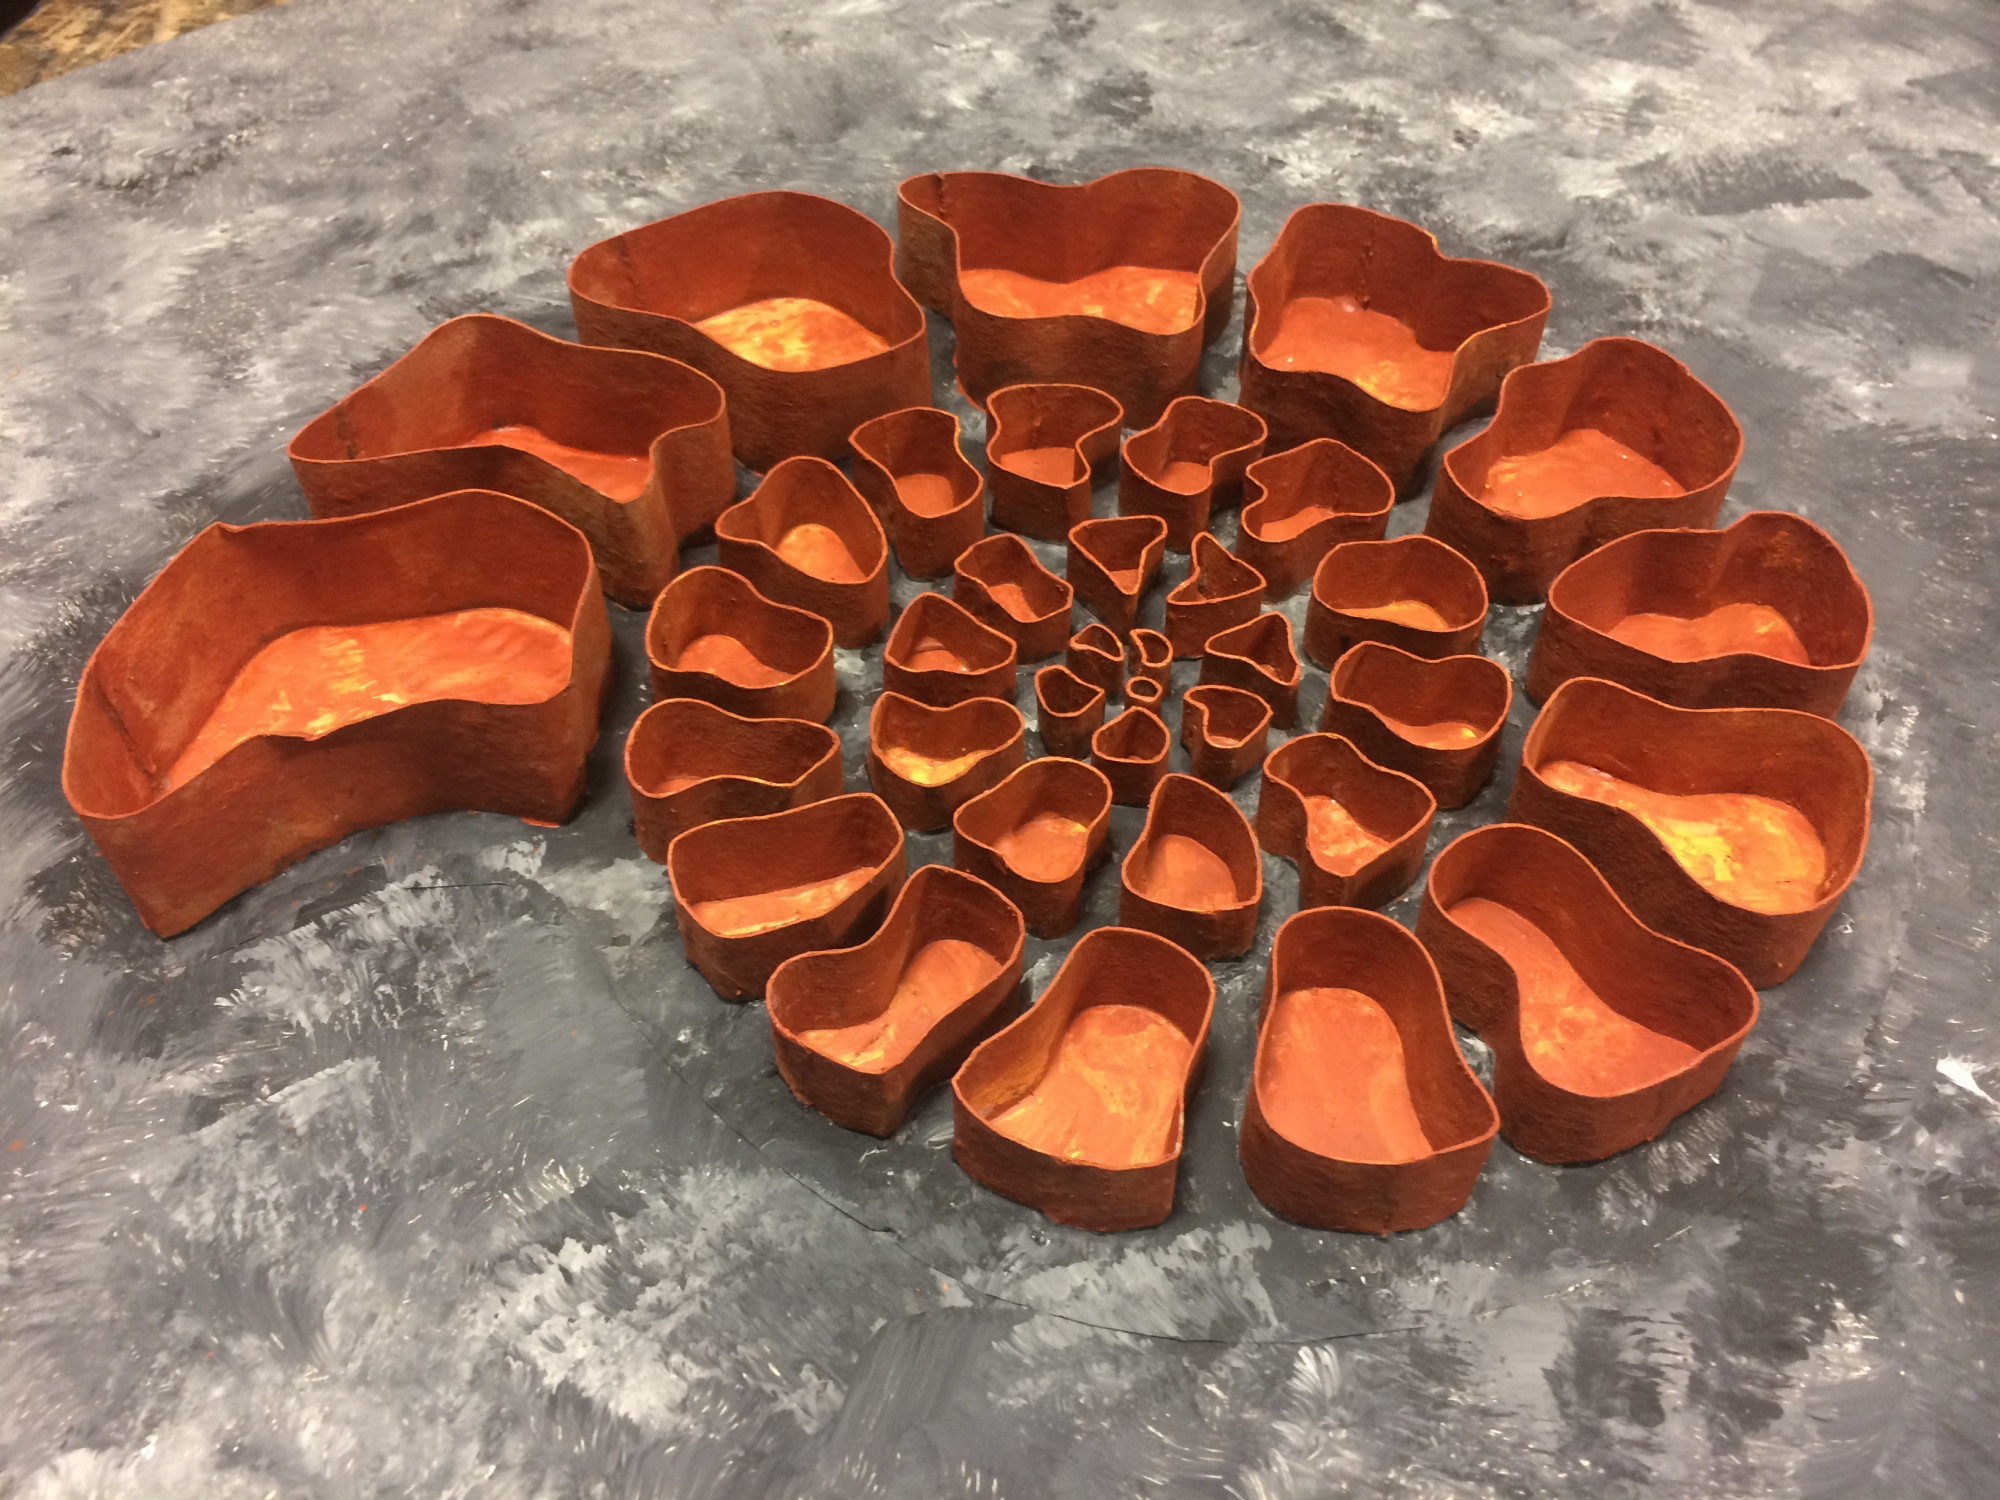 The green ammonite with a corten steel construction